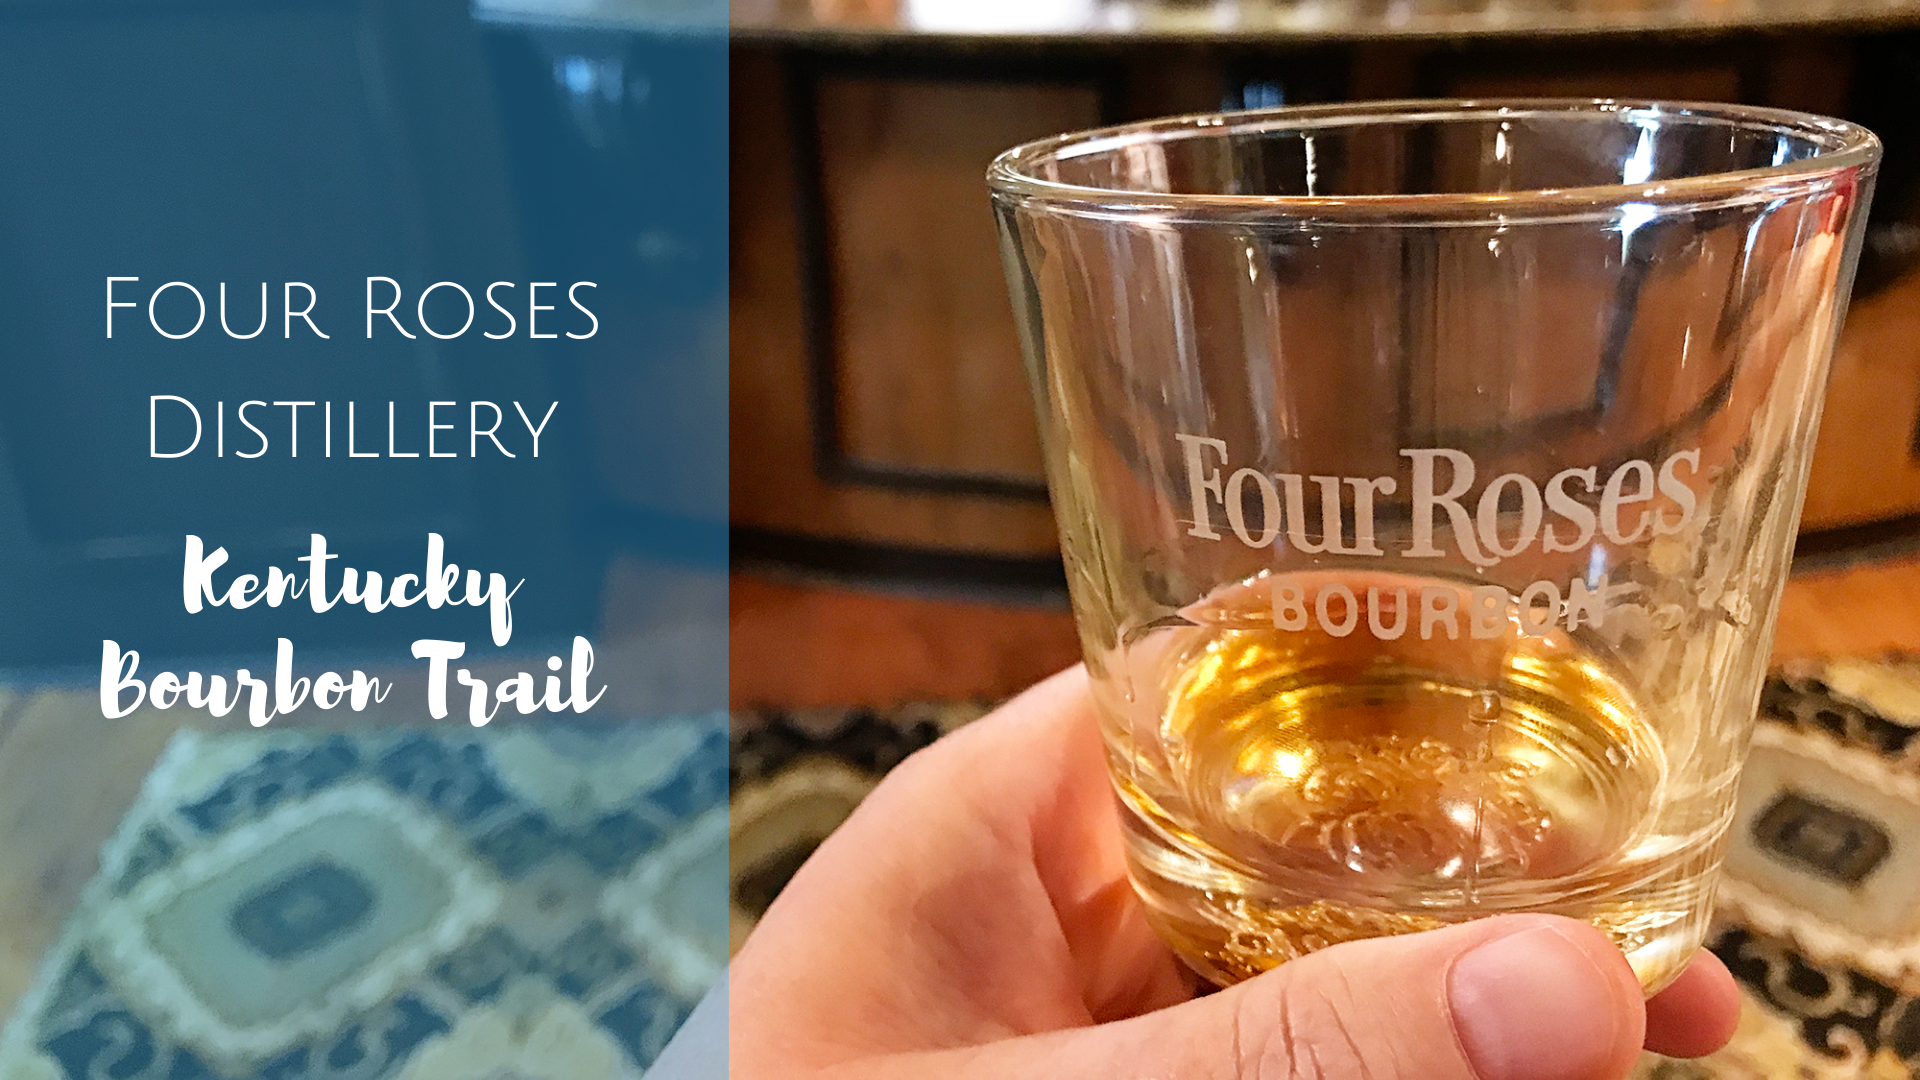 Kentucky Bourbon Trail: Four Roses Distillery Tour and Tasting in Louisville